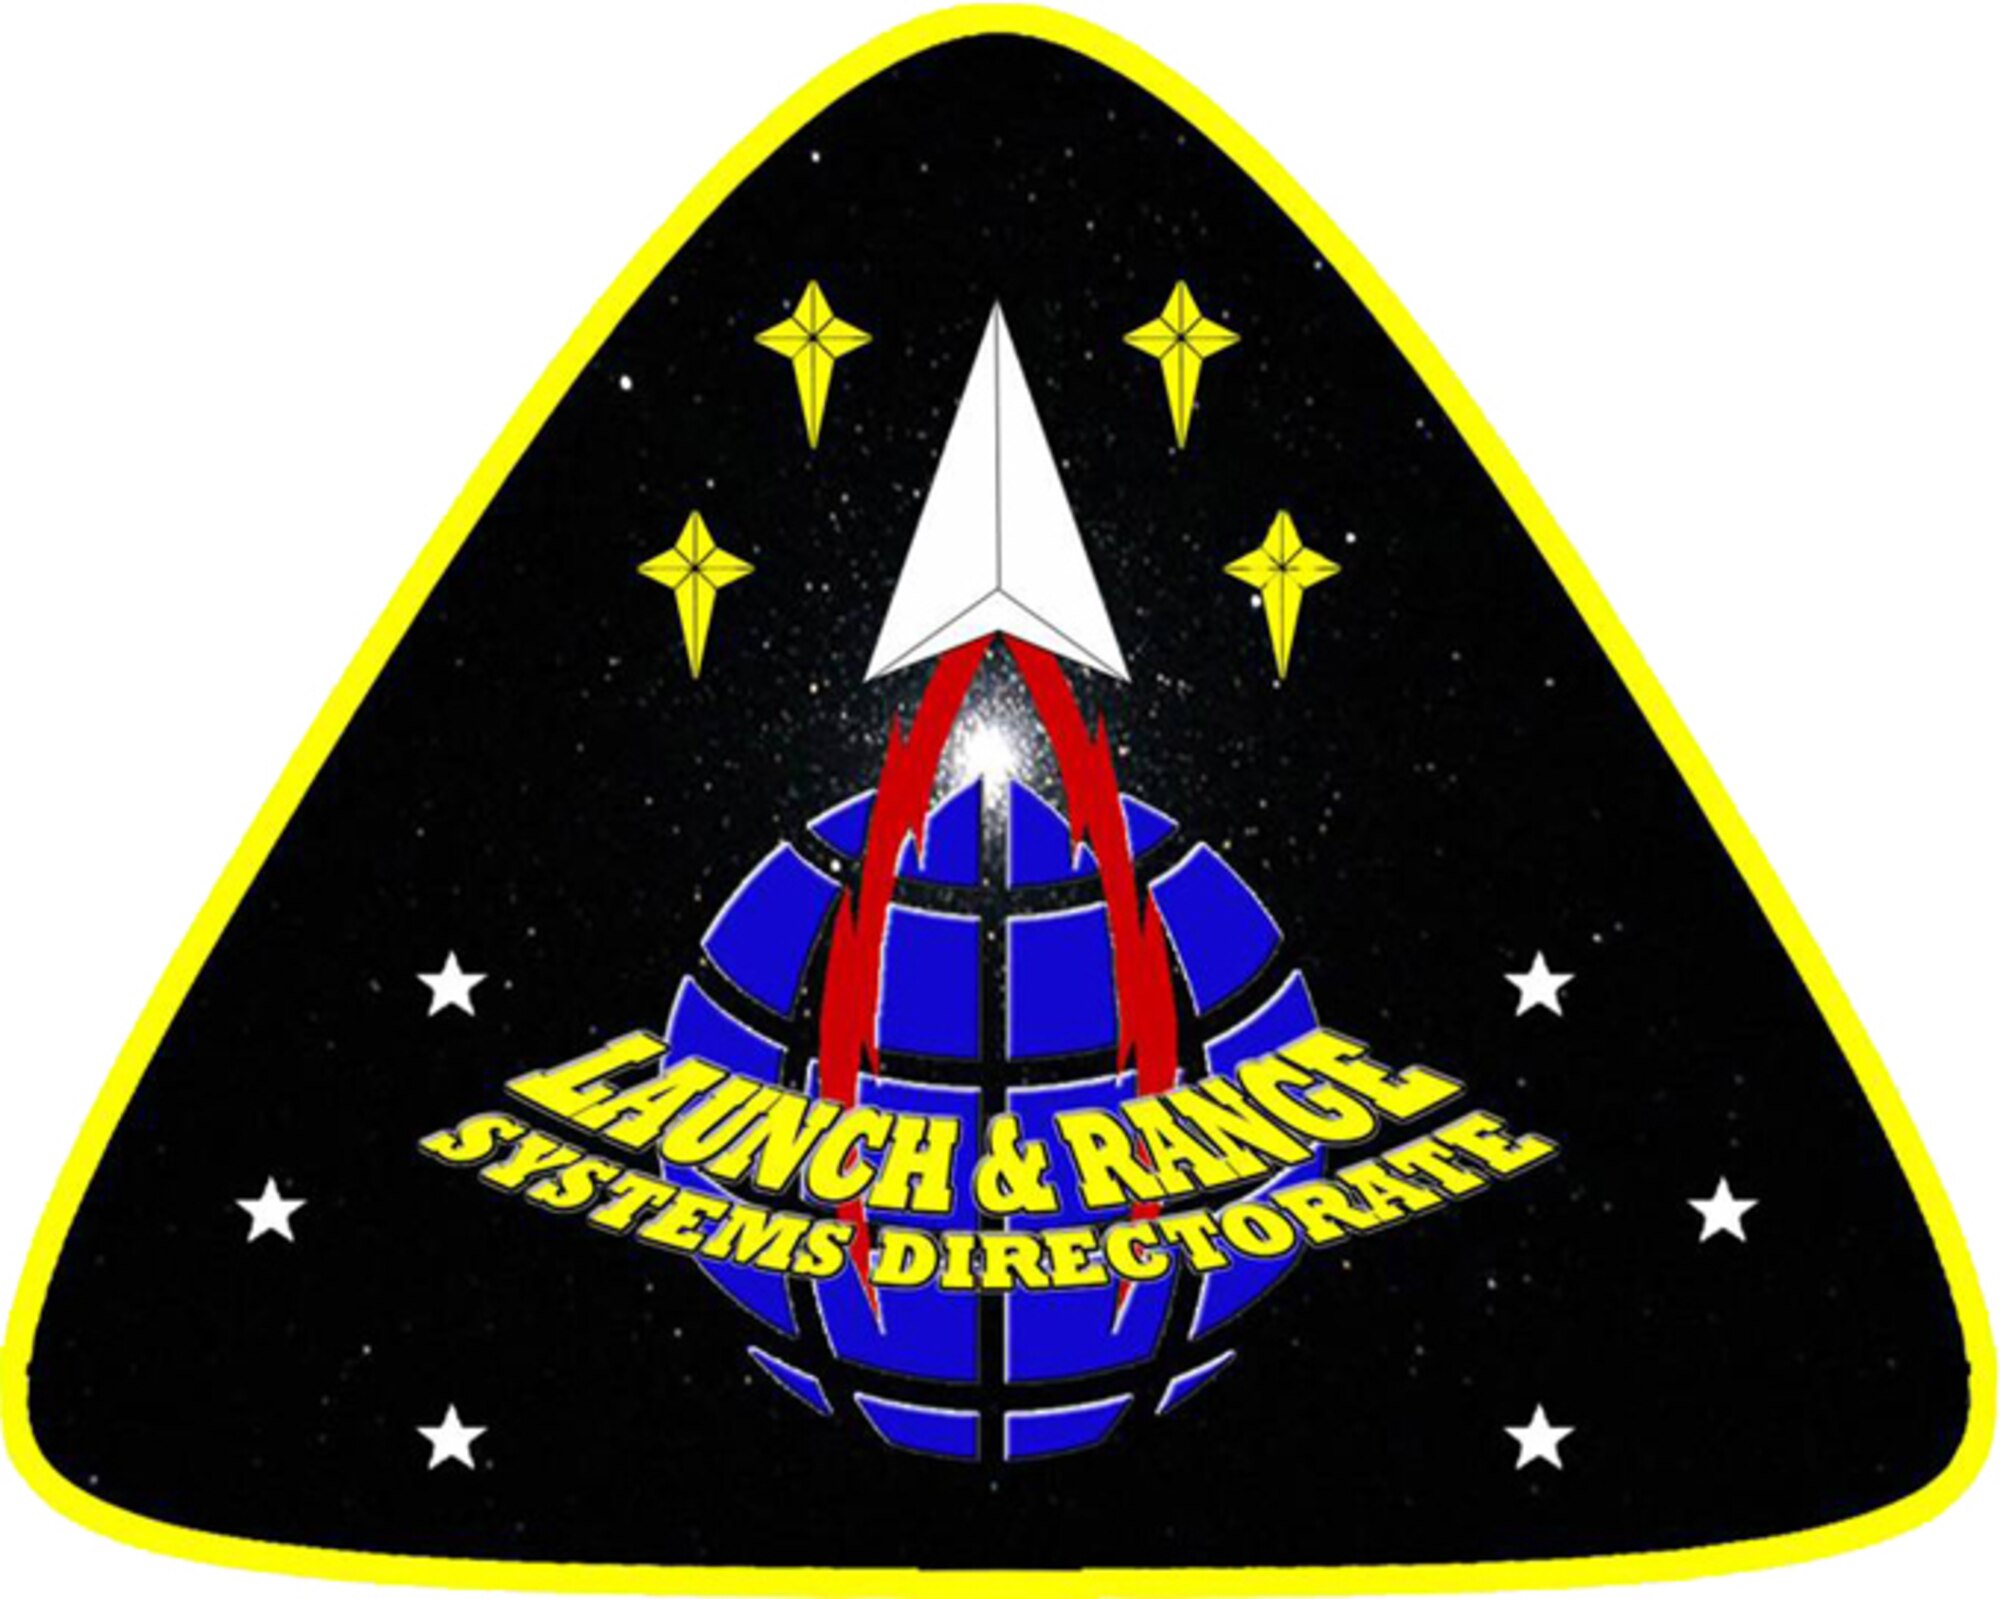 Launch and Range Systems Directorate